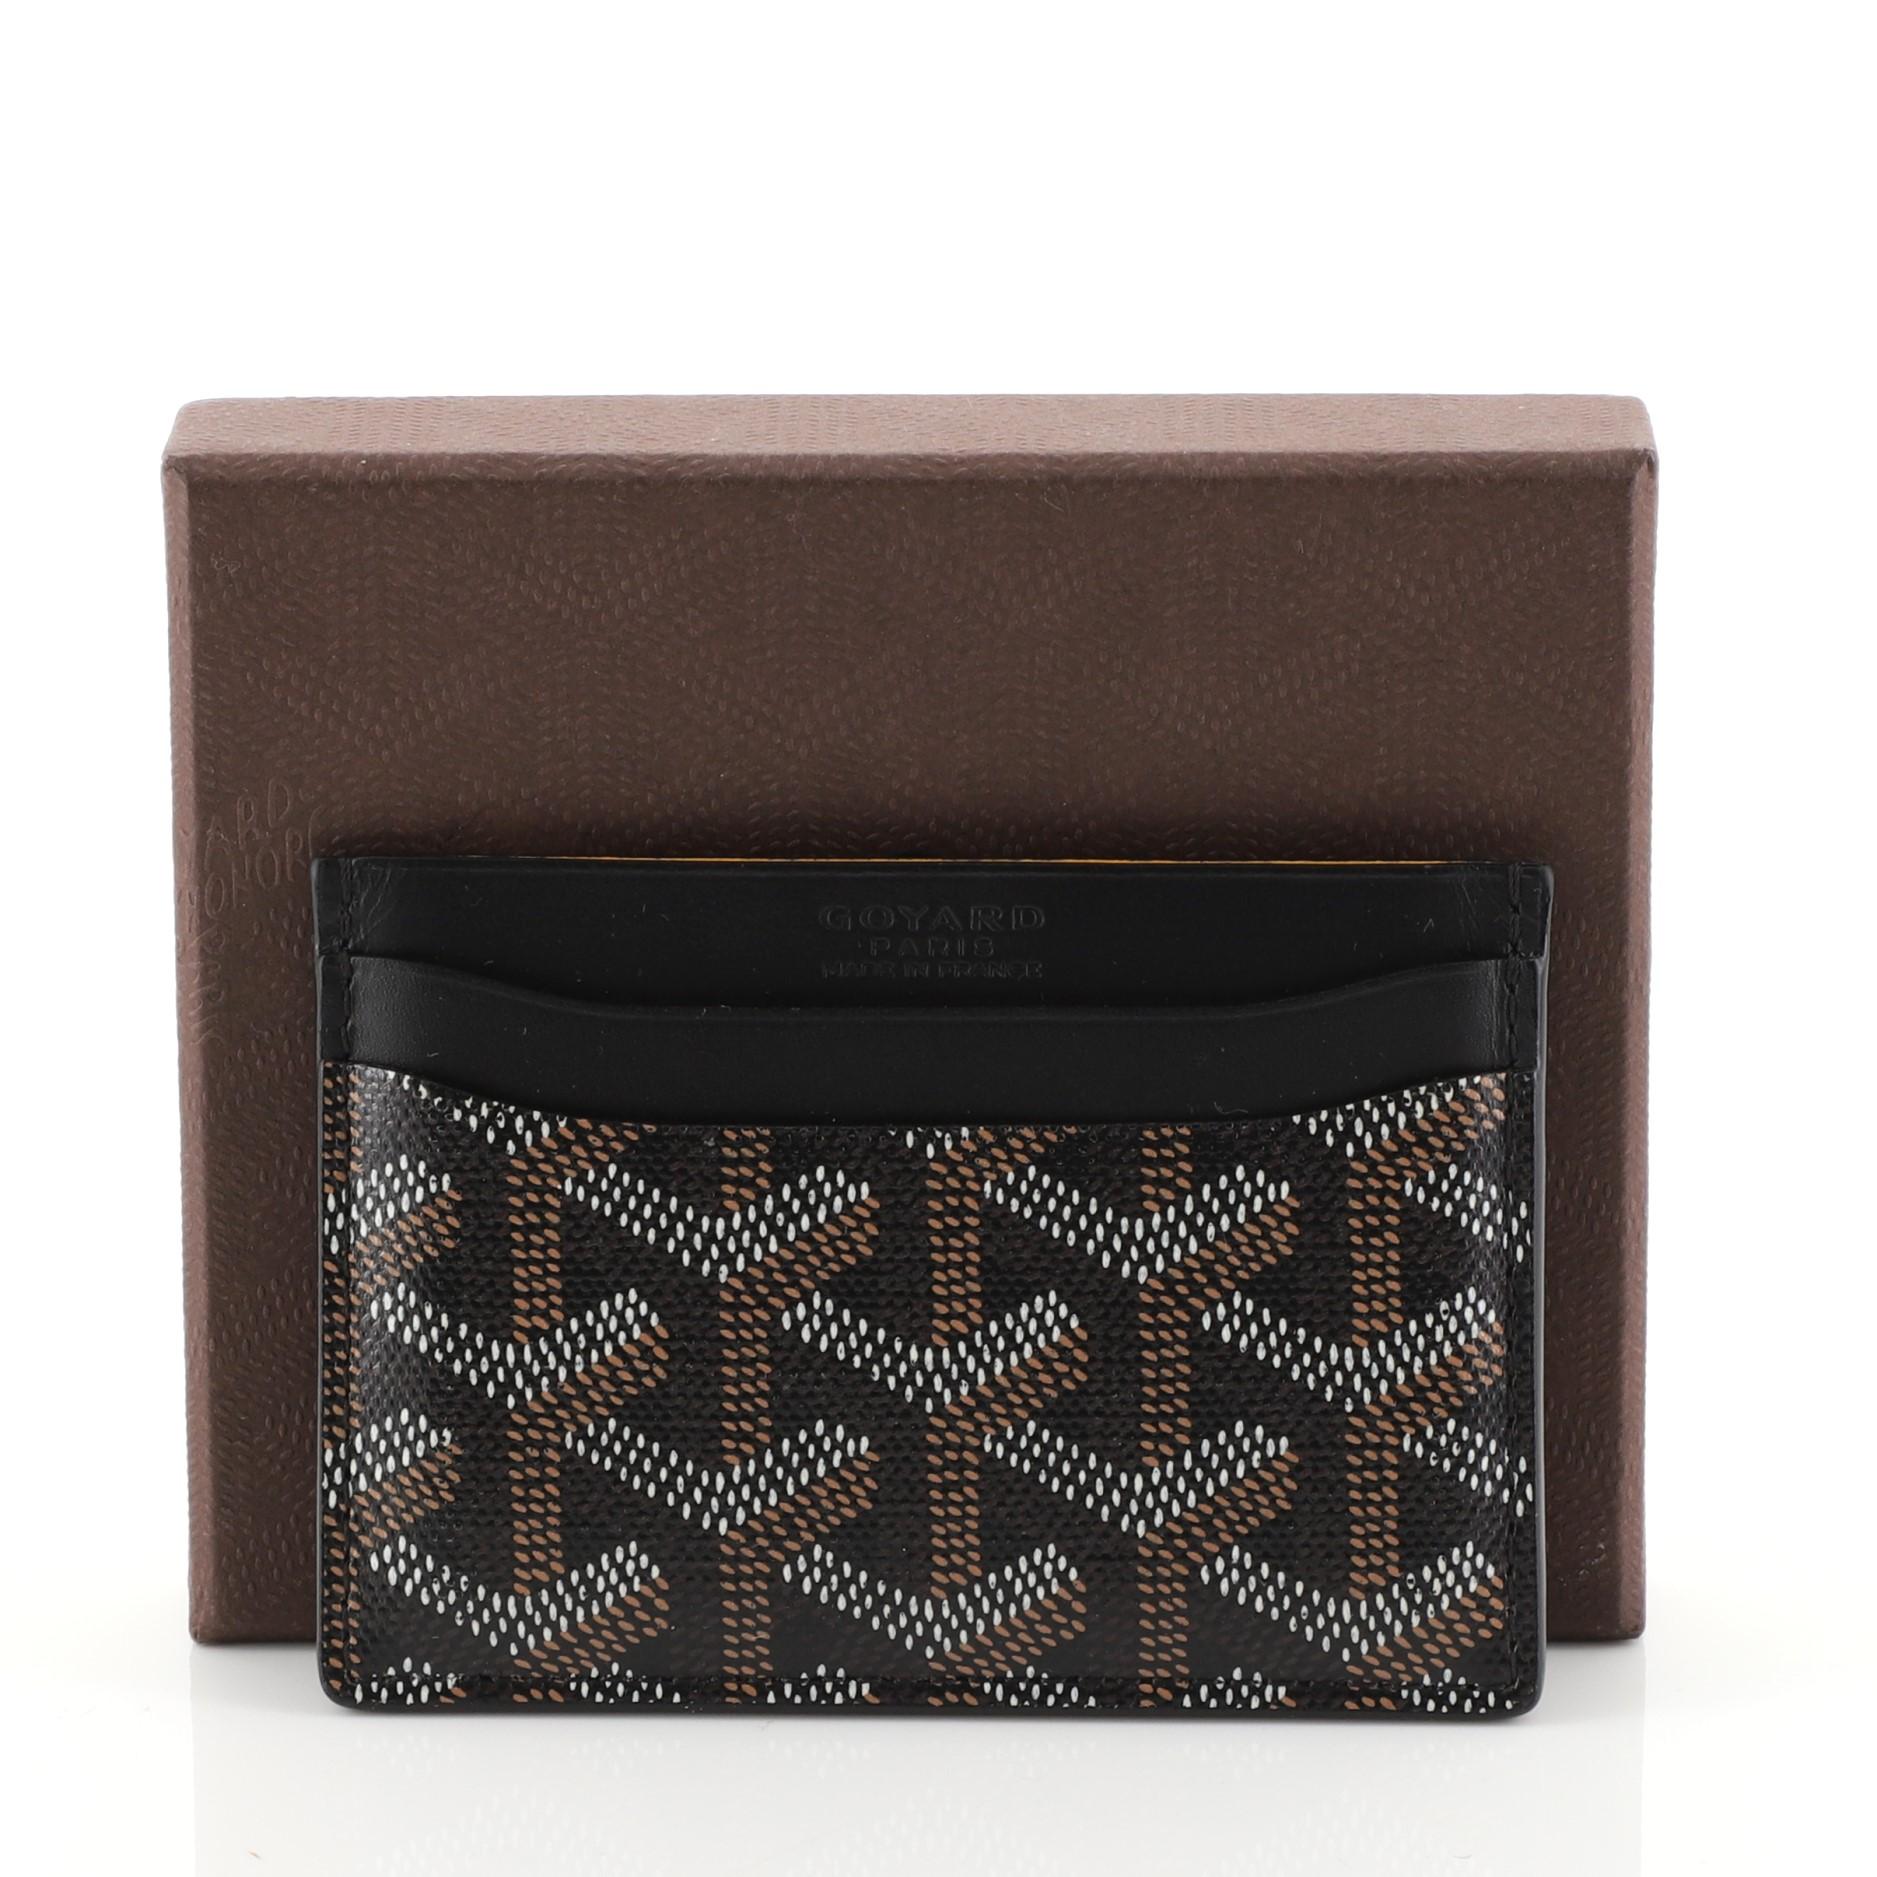 This Goyard Saint Sulpice Card Holder Coated Canvas, crafted from black coated canvas. It opens to a yellow leather interior with multiple card slots. 

Estimated Retail Price: $590
Condition: Great. Minor wear on base corners, faint scuffs on